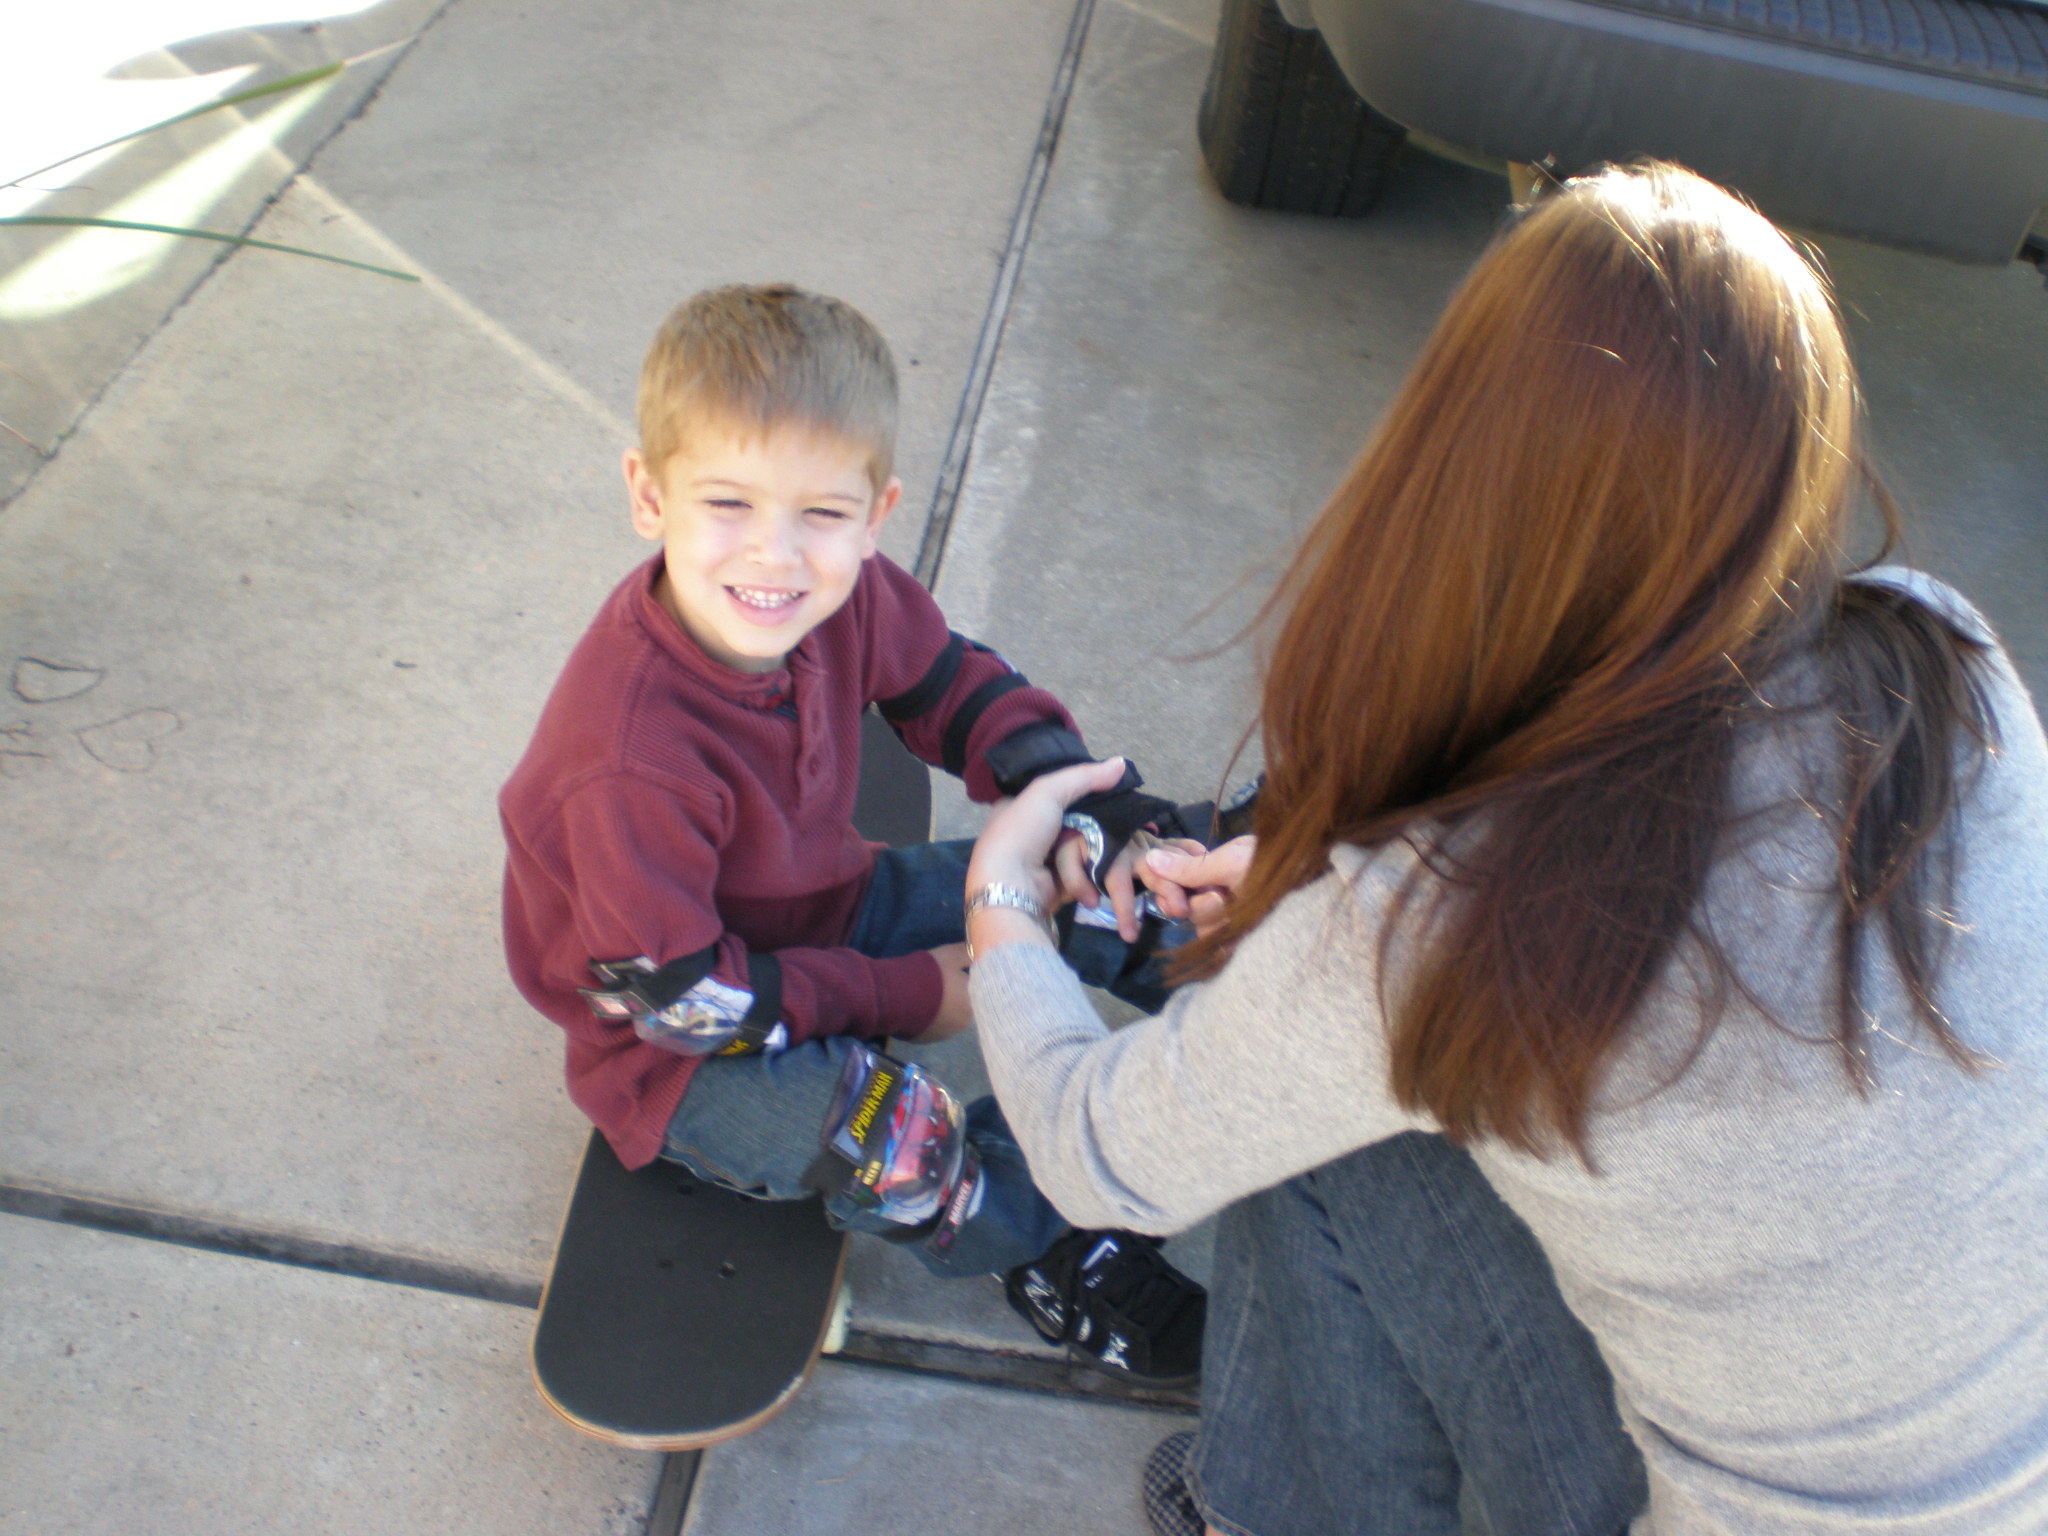 a woman showing a boy how to ride a skateboard